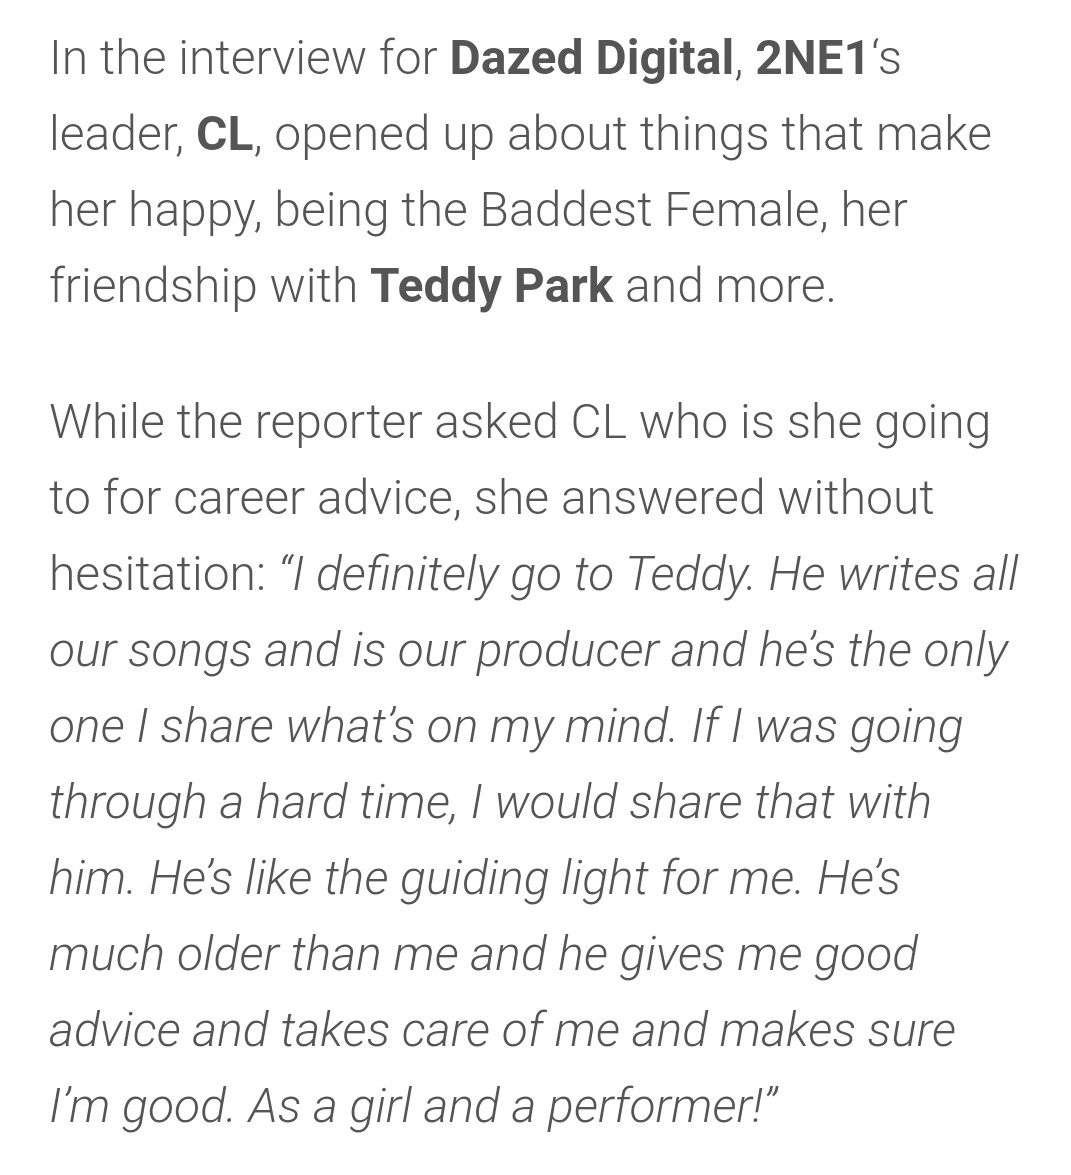 the reporter asked CL who is she going to for career advice she answered withouth hesitation "i definitely go to teddy" #2NE1  @chaelinCL  @krungy21  @haroobomkum  @mingkki21 |  #TEDDY  #1TYM  #THEBLACKLABEL